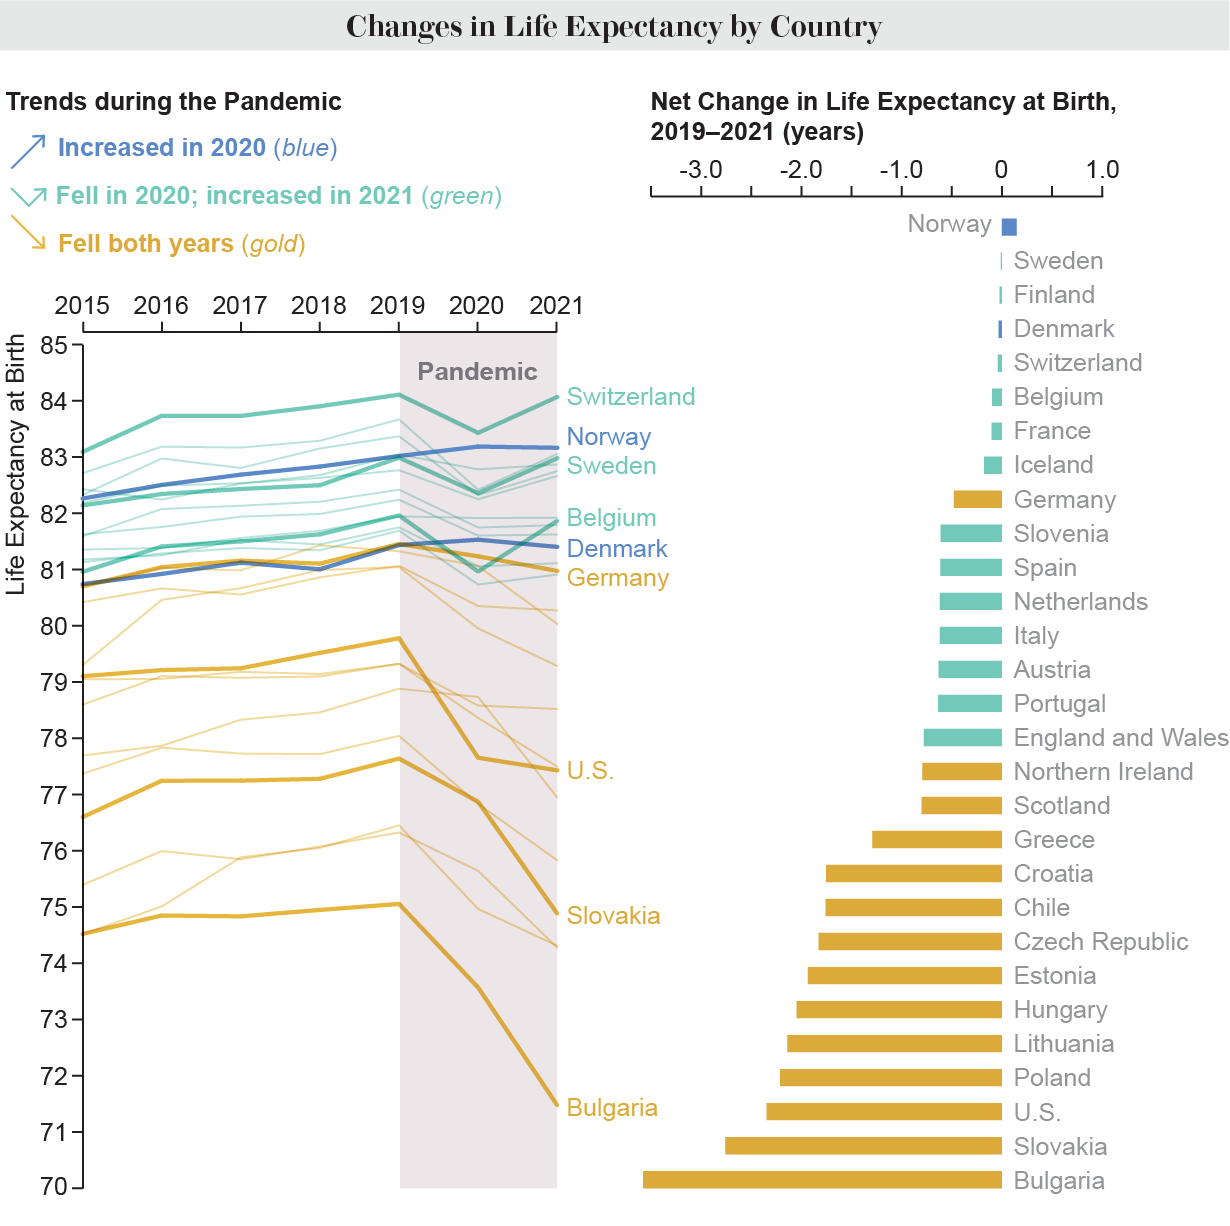 Charts show life expectancy at birth since 2015 and how it changed during the pandemic in 29 countries or regions.